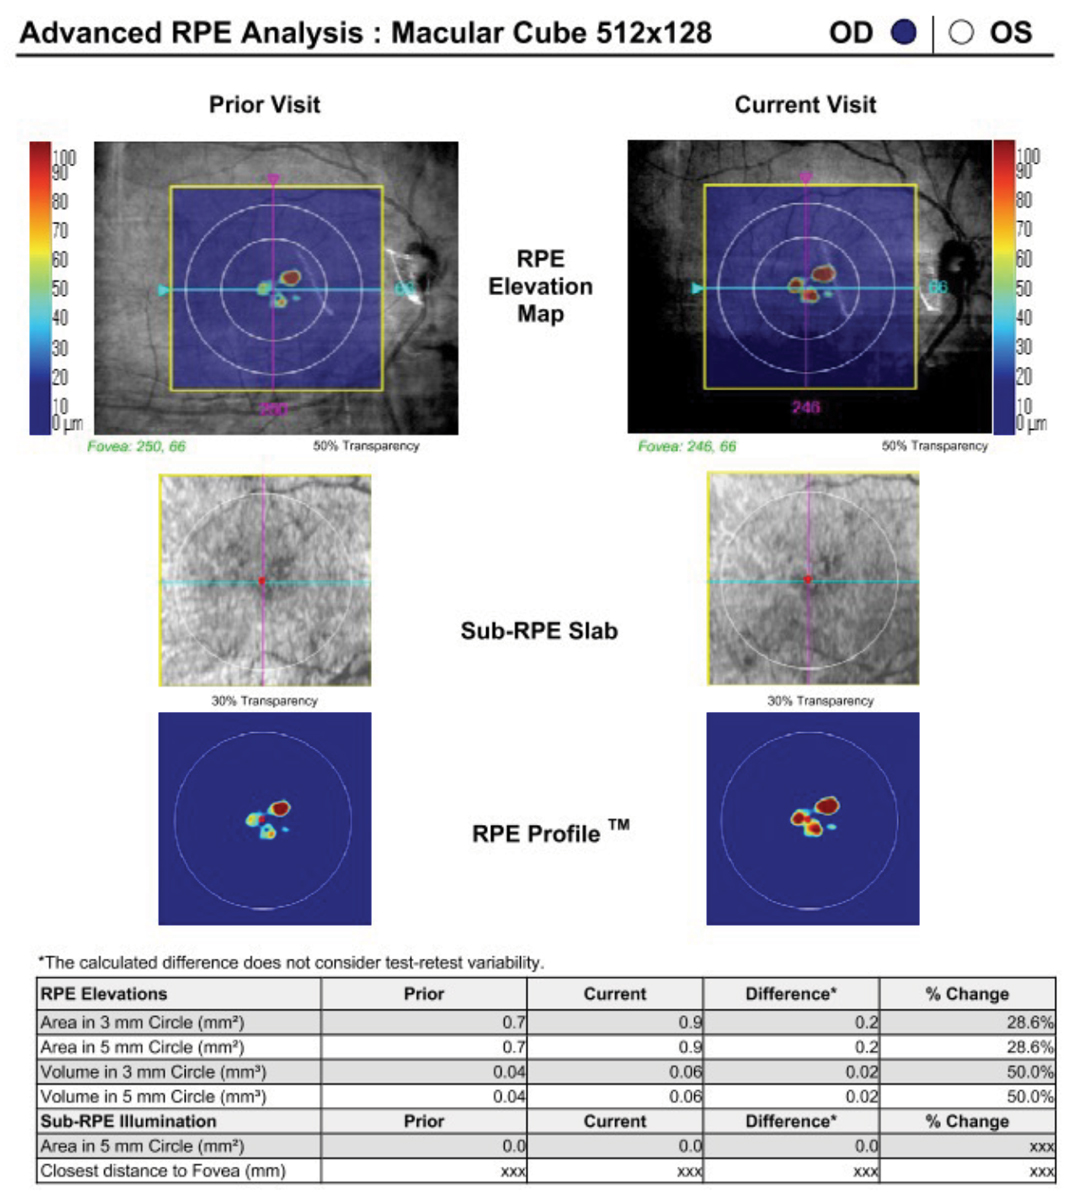 Fig. 6. A macular cube scan on the Cirrus can be used to extrapolate and track drusen volume using its Advanced RPE Analysis software. 